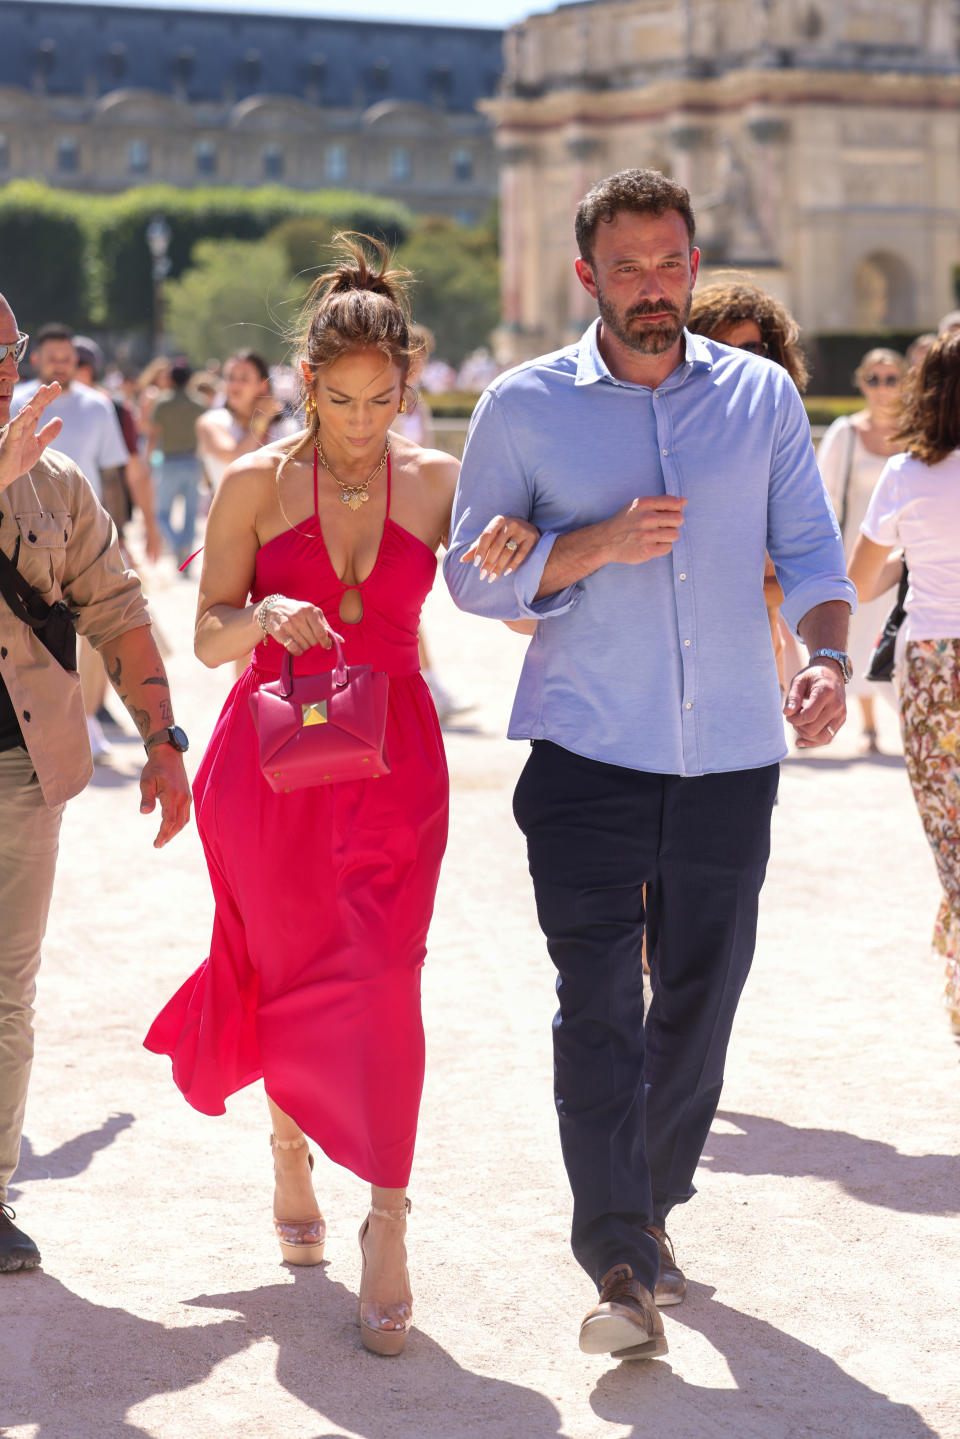 Jennifer Lopez and Ben Affleck are seen strolling near the Louvre Museum on July 24, 2022 in Paris, France. (Photo by Pierre Suu/GC Images)